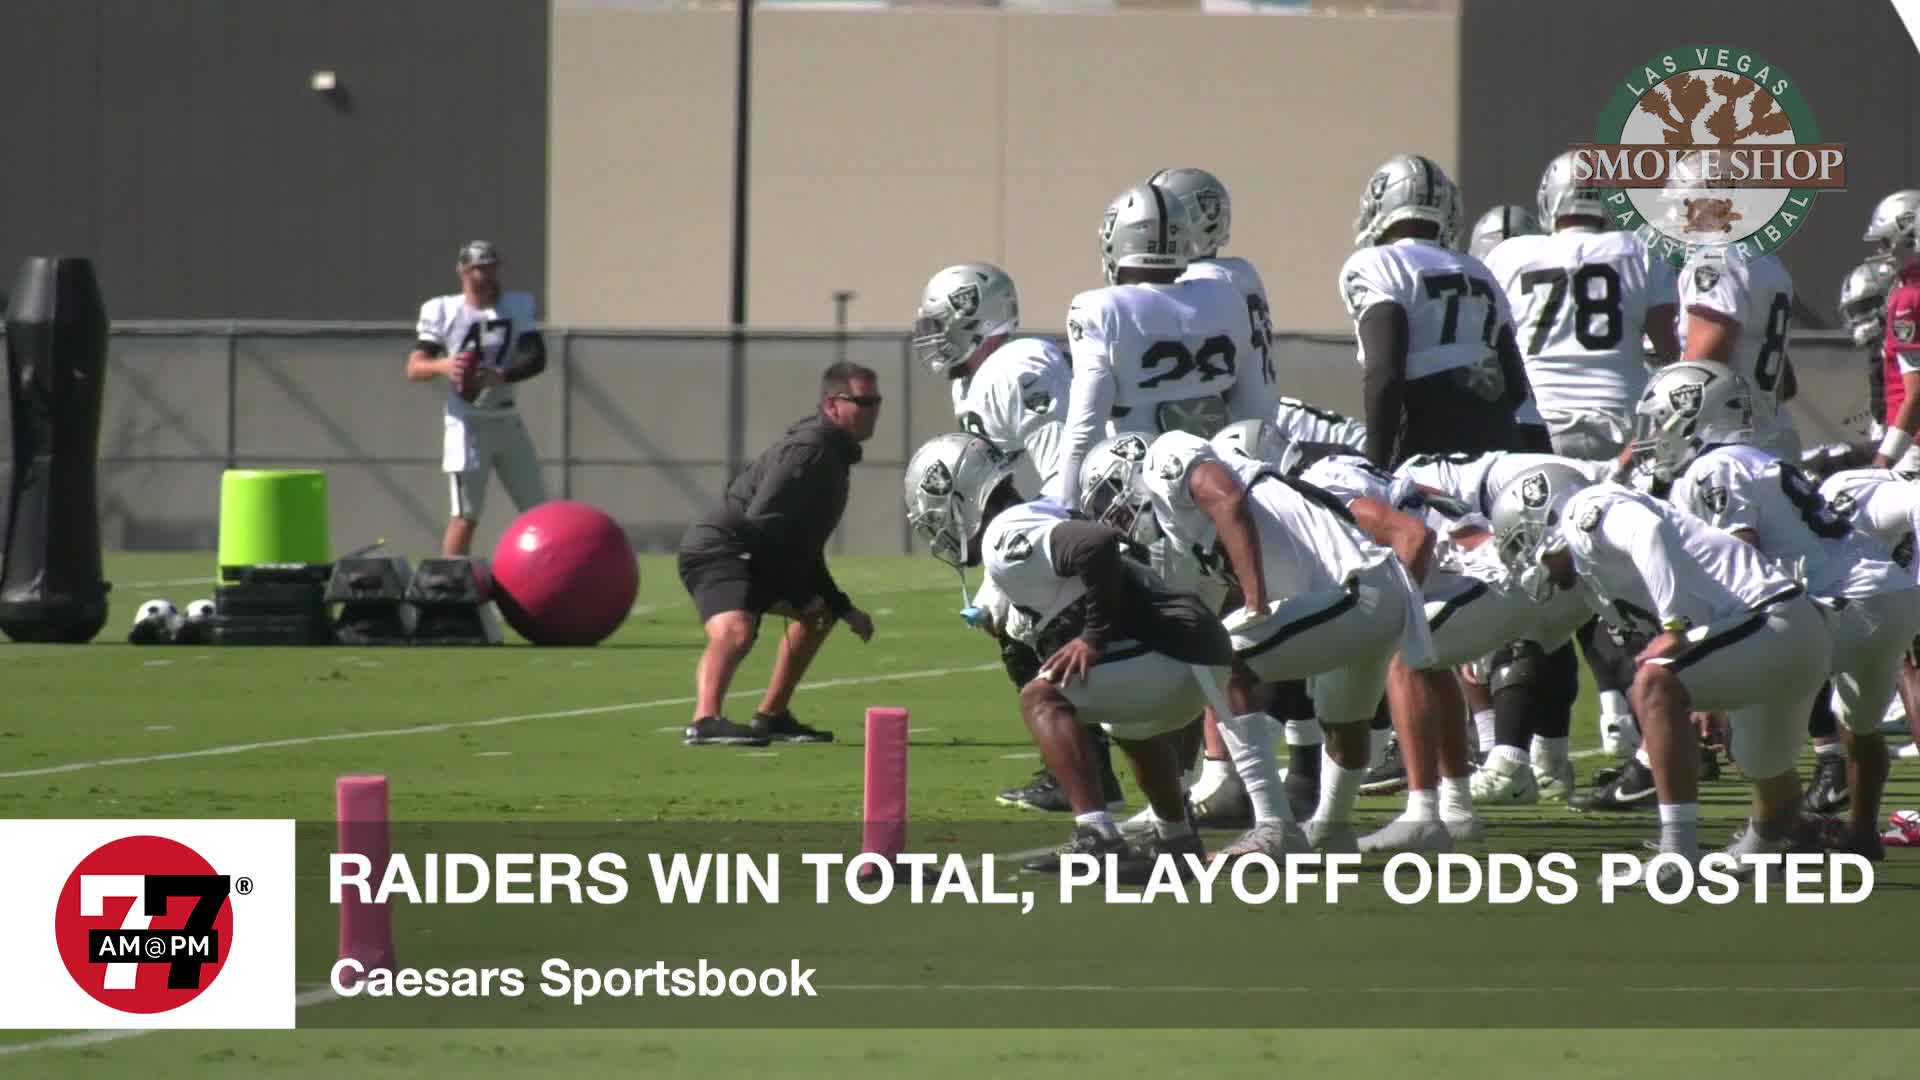 Raiders season odds and totals